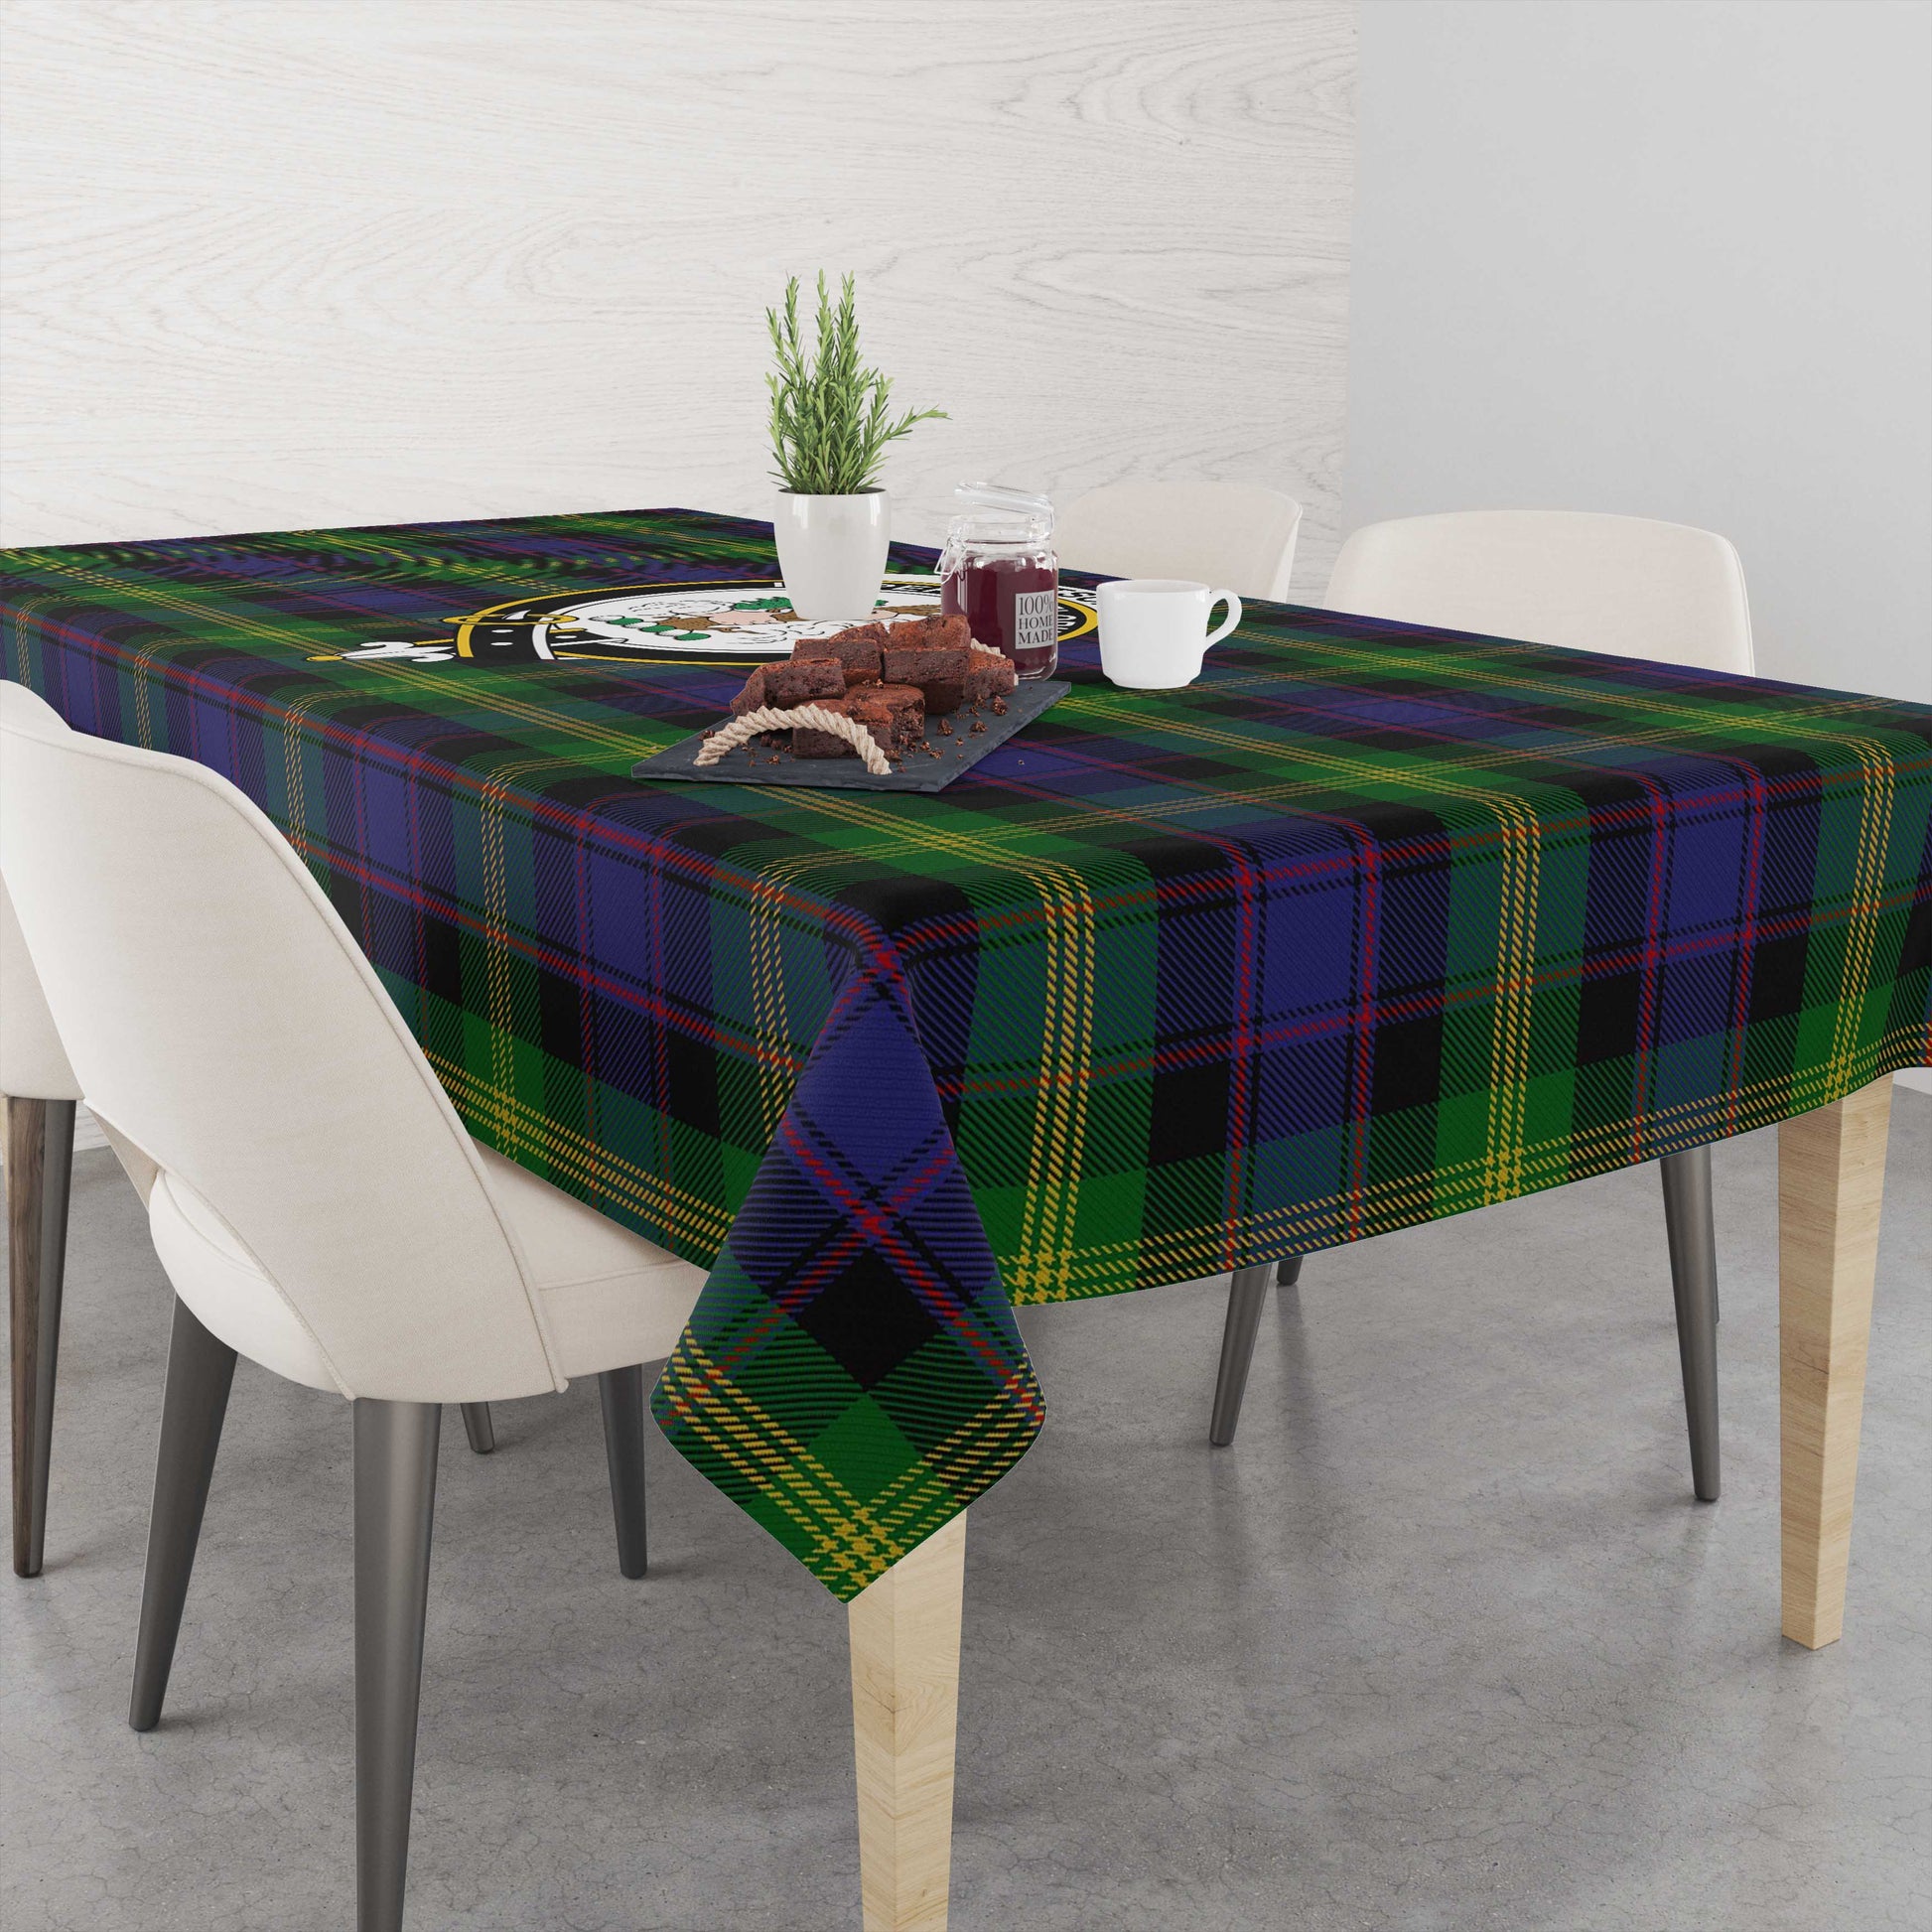 watson-tatan-tablecloth-with-family-crest